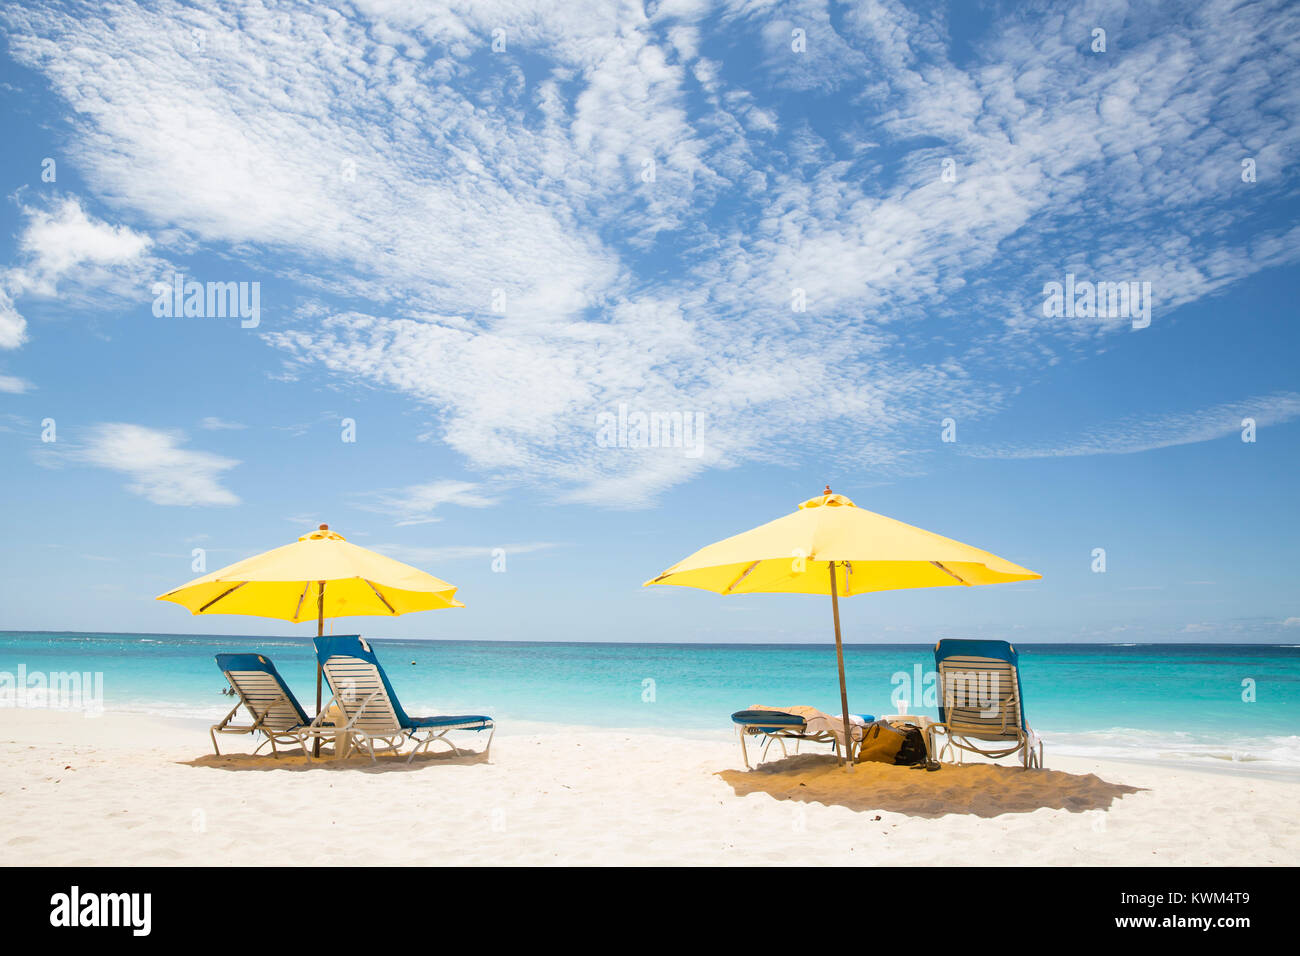 Scenic view of parasols and lounge chairs at beach against cloudy sky during sunny day Stock Photo